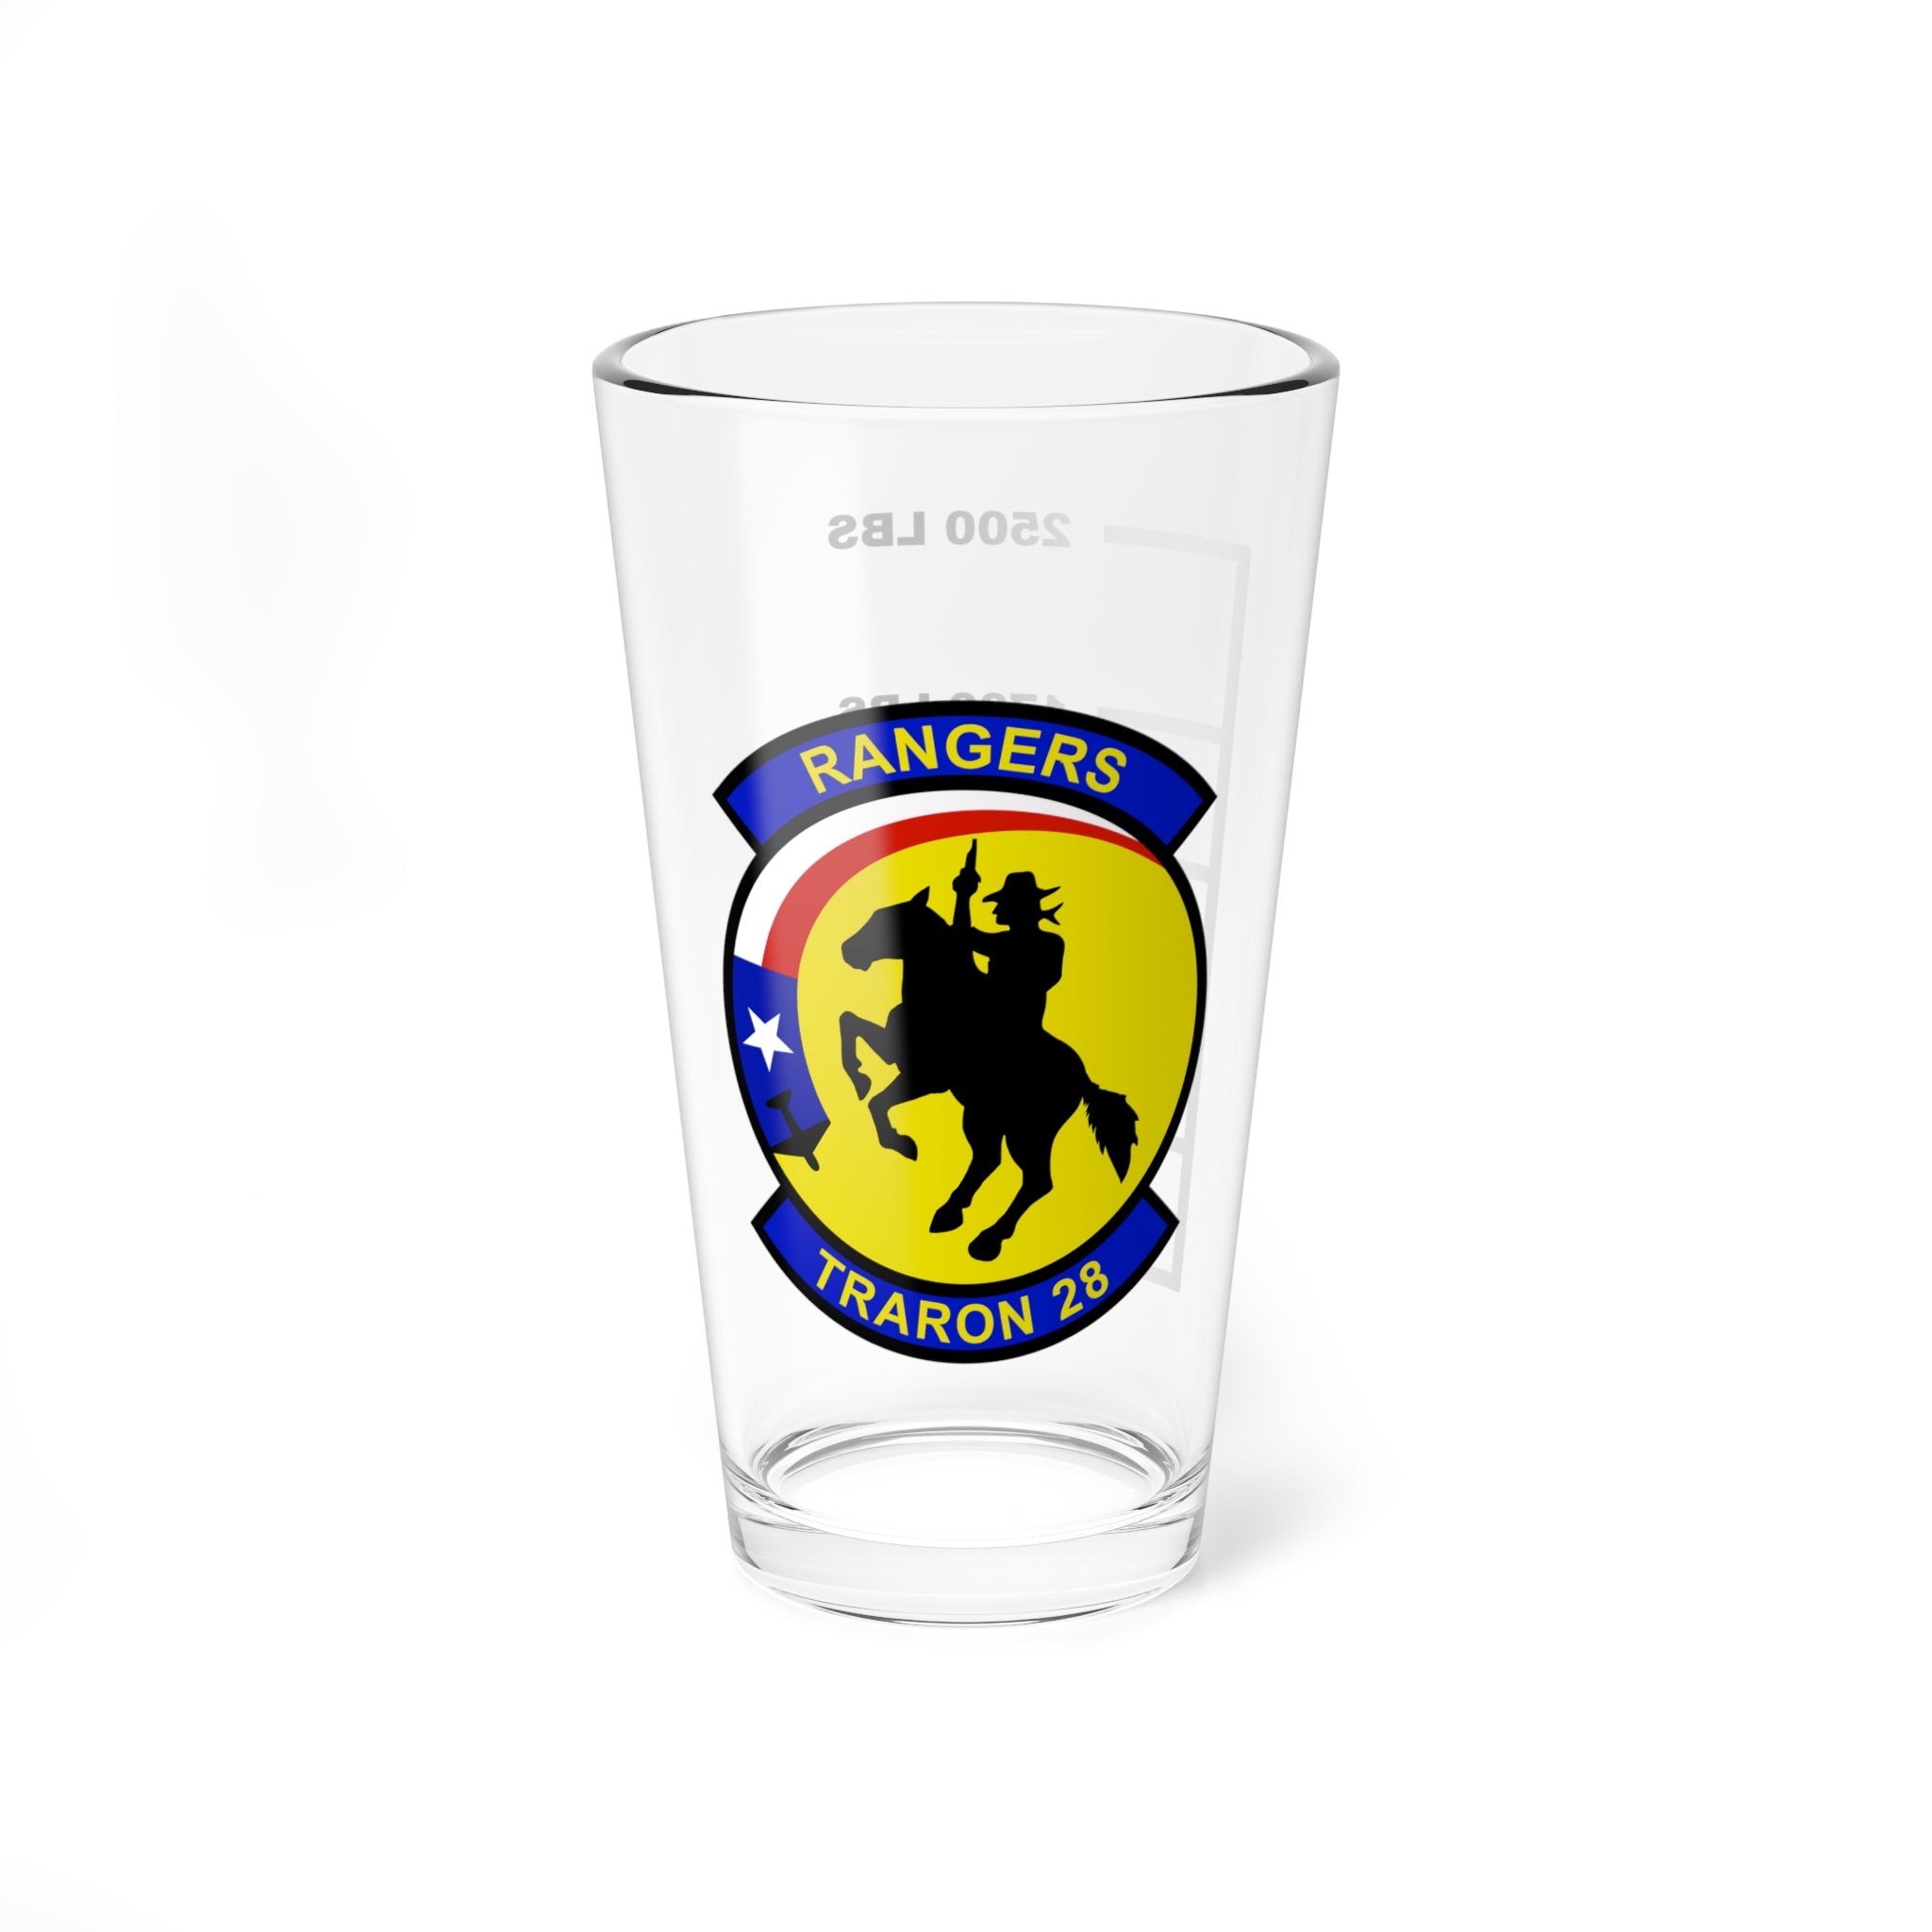 VT-28 "Rangers" Fuel Low Pint Glass Mixing Glass, 16oz, Navy, Marine, Aviator, Aviation, Wings, Veteran, Helicopter, Training